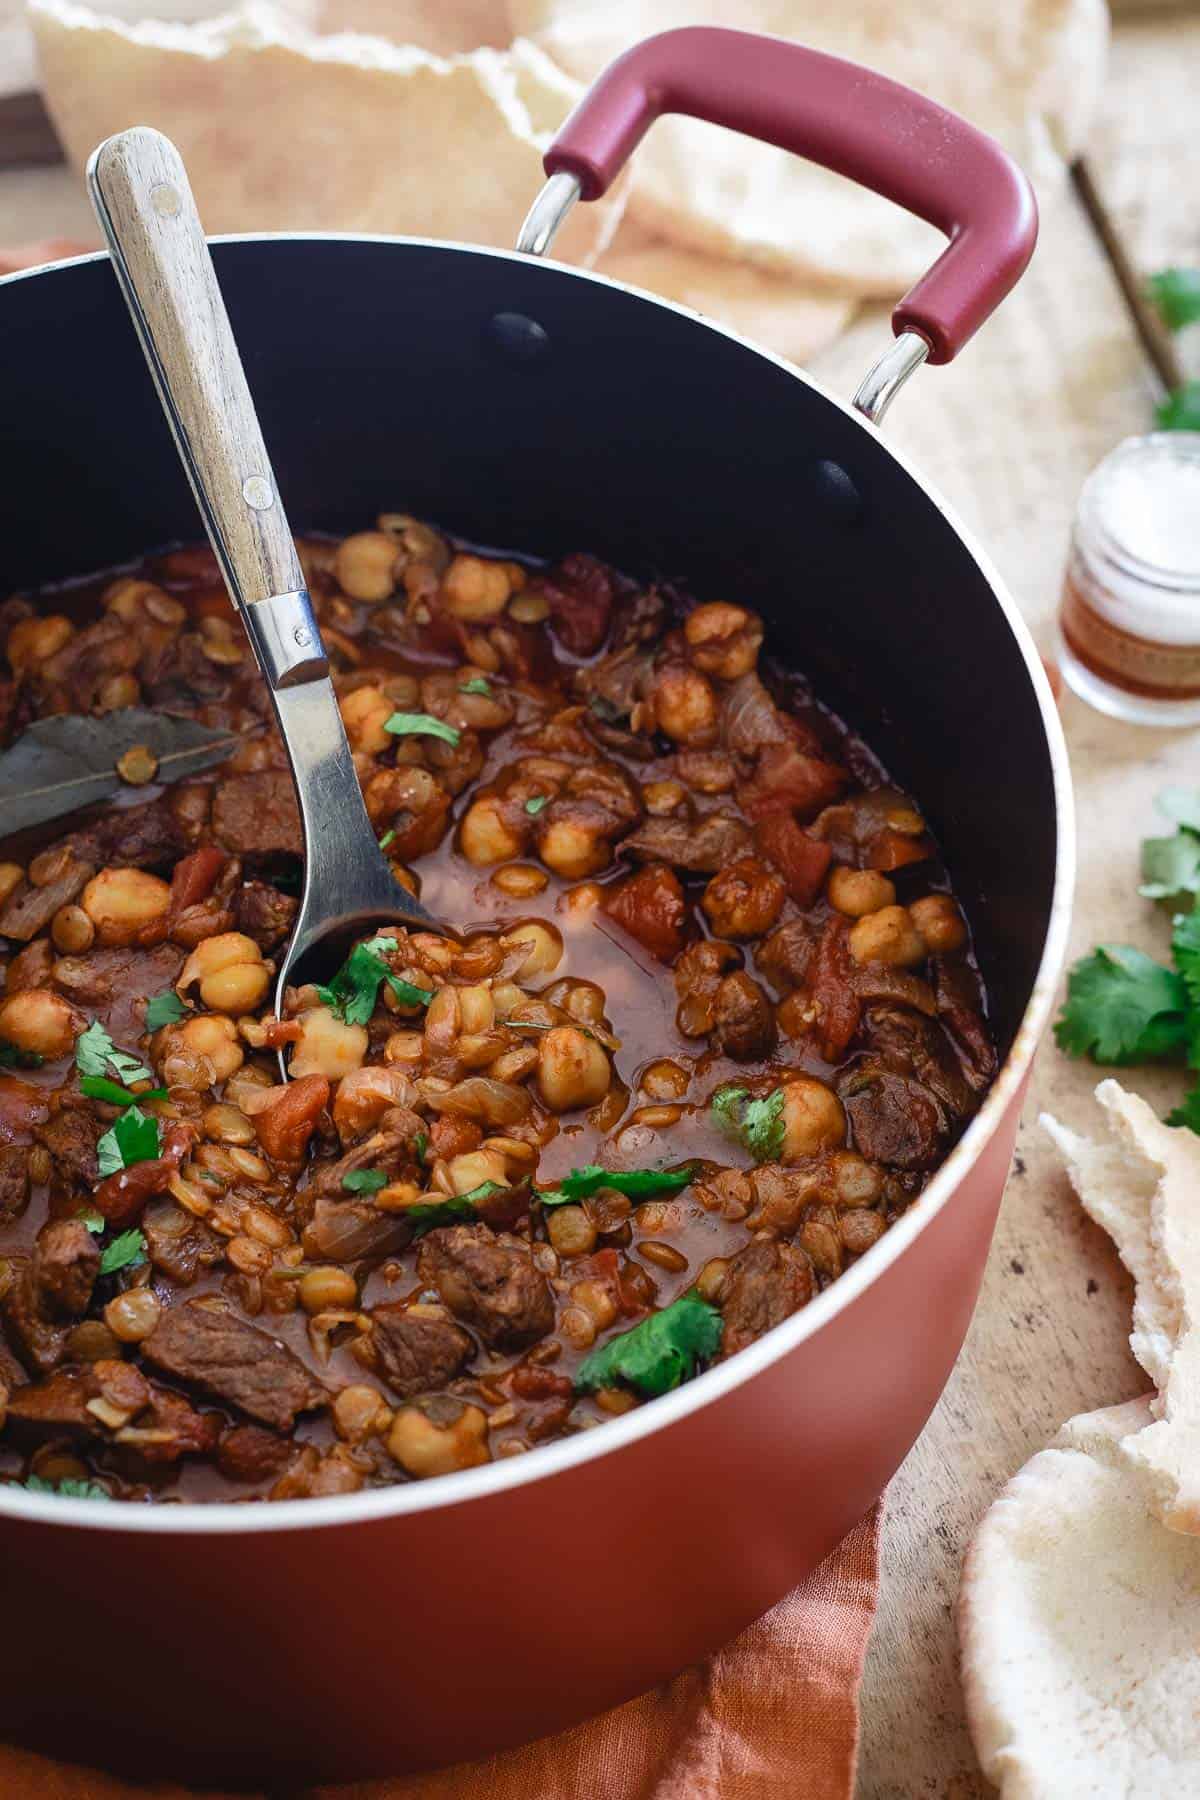 This lamb lentil stew is flavored with Moroccan spices and beefed up with chickpeas. Serve with fresh cilantro and a dollop of yogurt for a hearty and comforting winter meal.